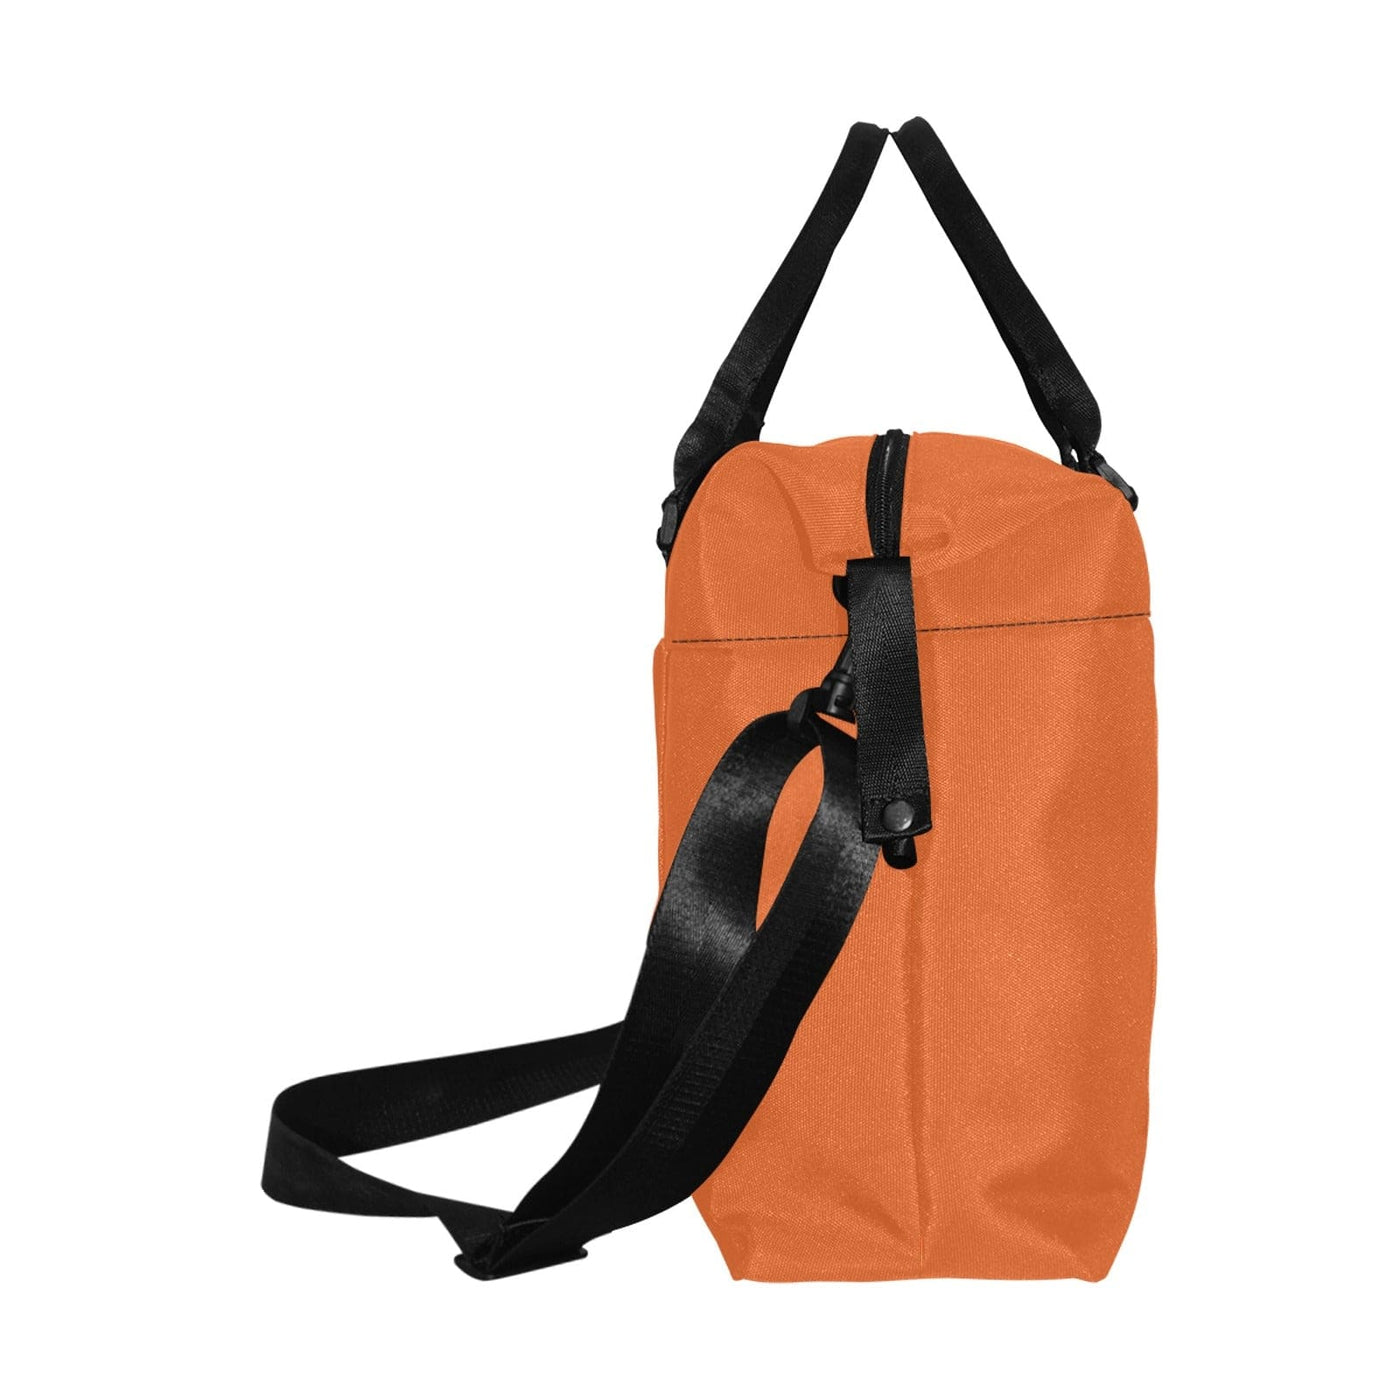 Travel Bag Rust Orange Canvas Carry On - Bags | Travel Bags | Canvas Carry